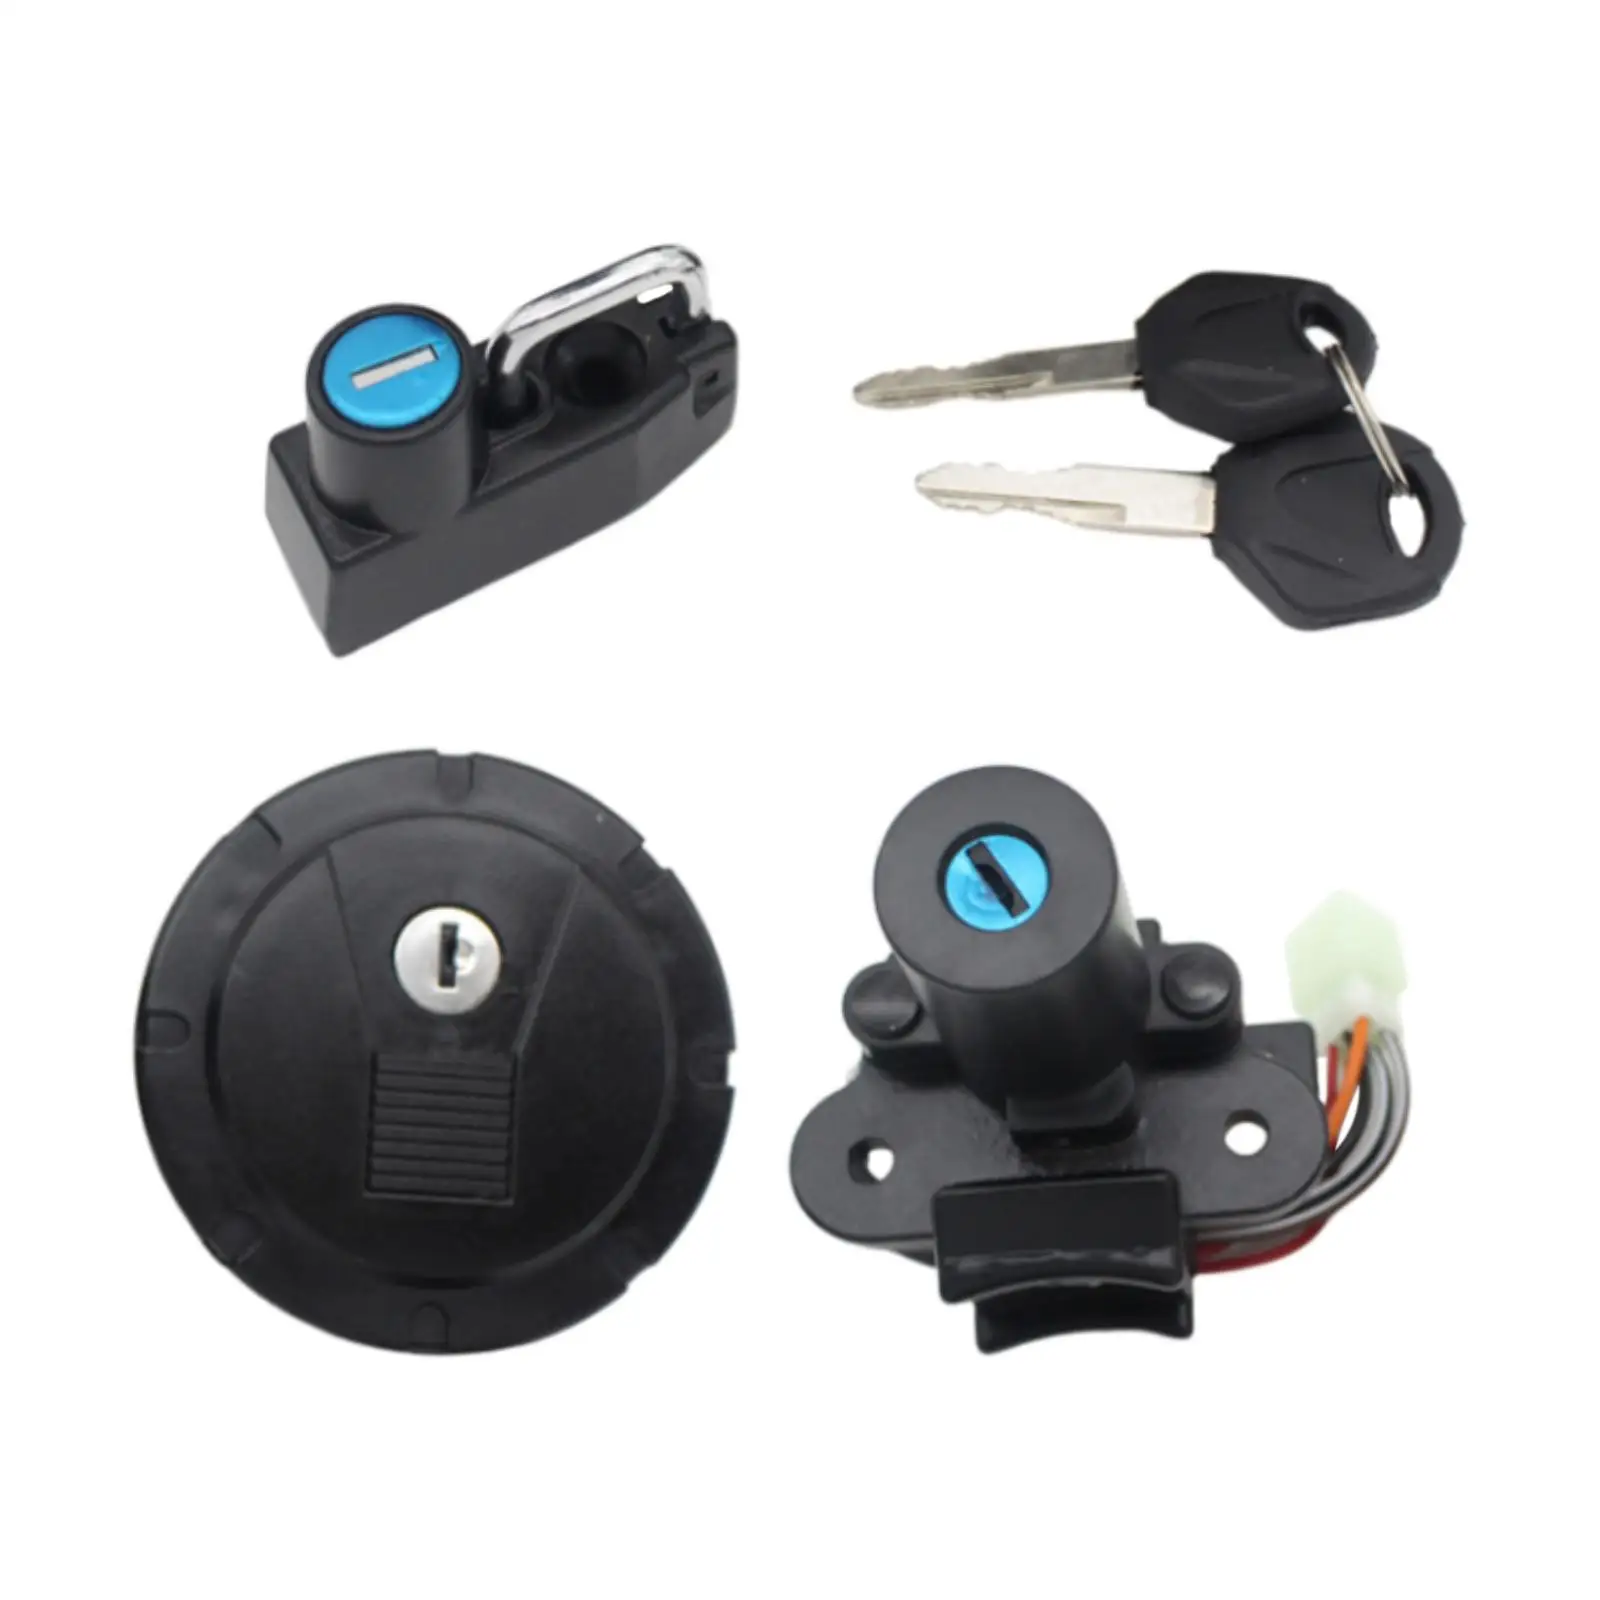 Fuel Gas Cap Tank Lock Set Replace Accessories Sturdy for Klr250 Klr650 Motorbike Spare Parts Easily Install Professional